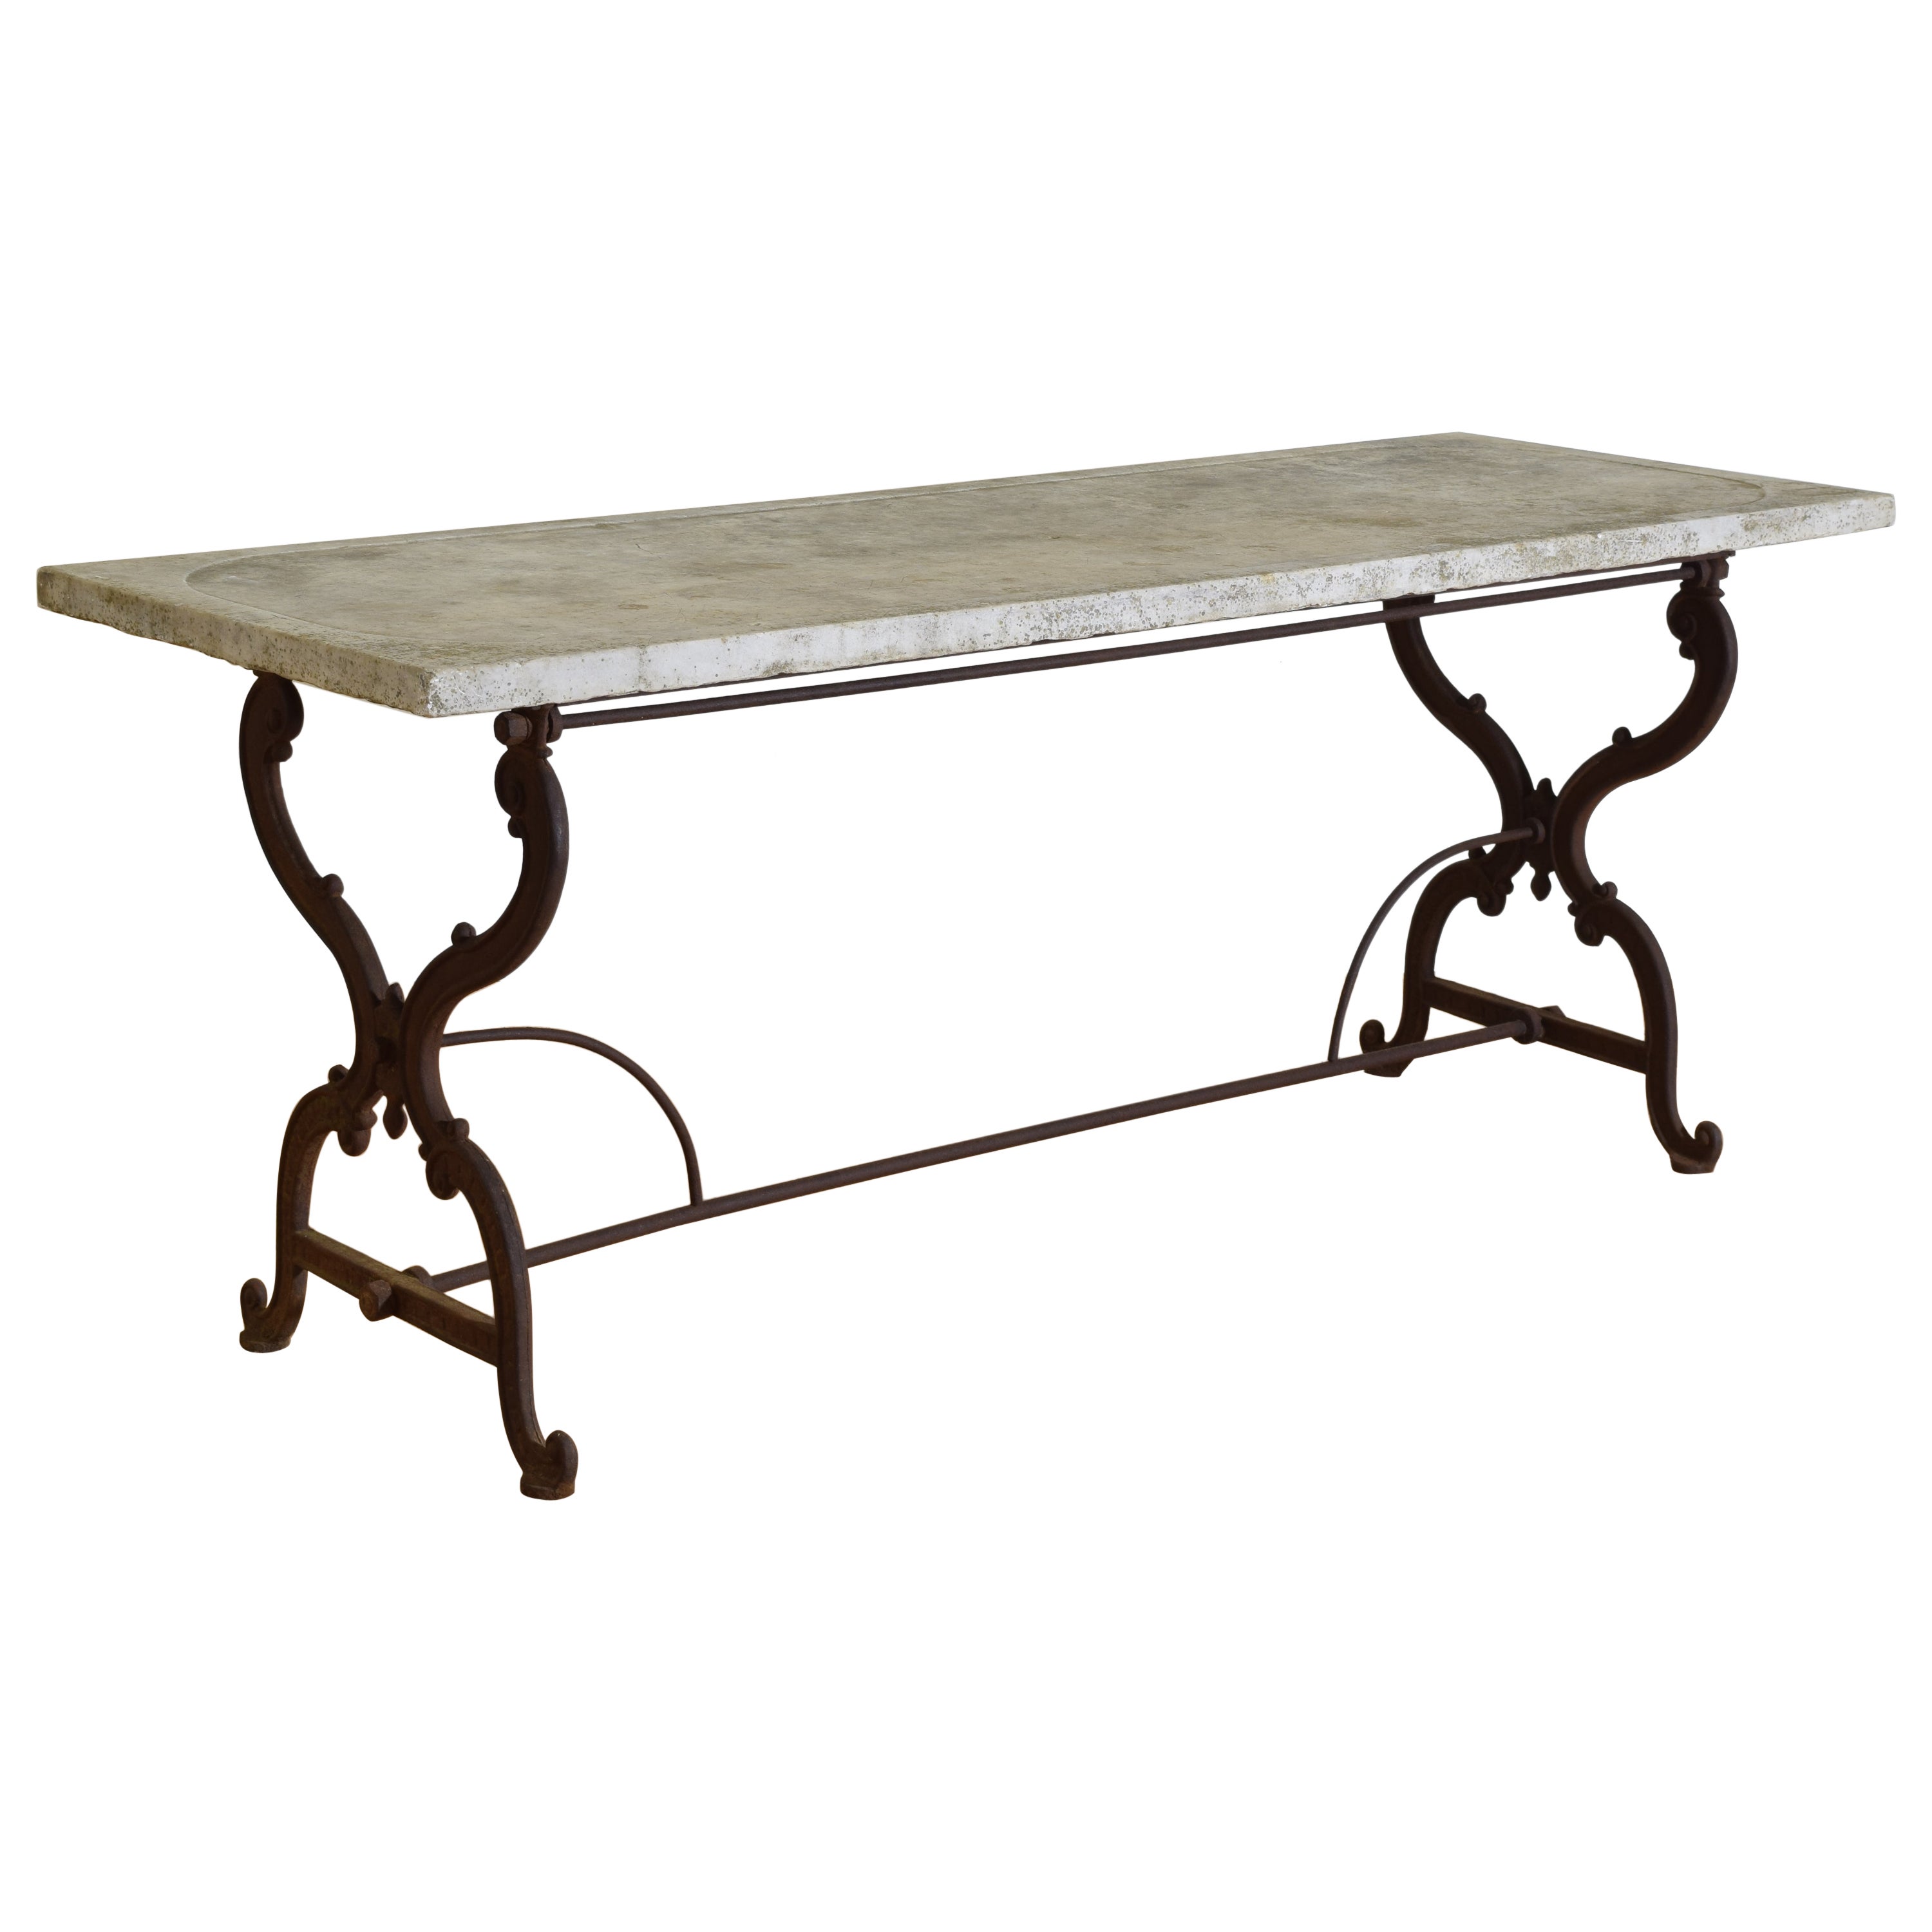 French Late Victorian Wrought Iron & Marble Gardener’s Table, lastq 19th cen.